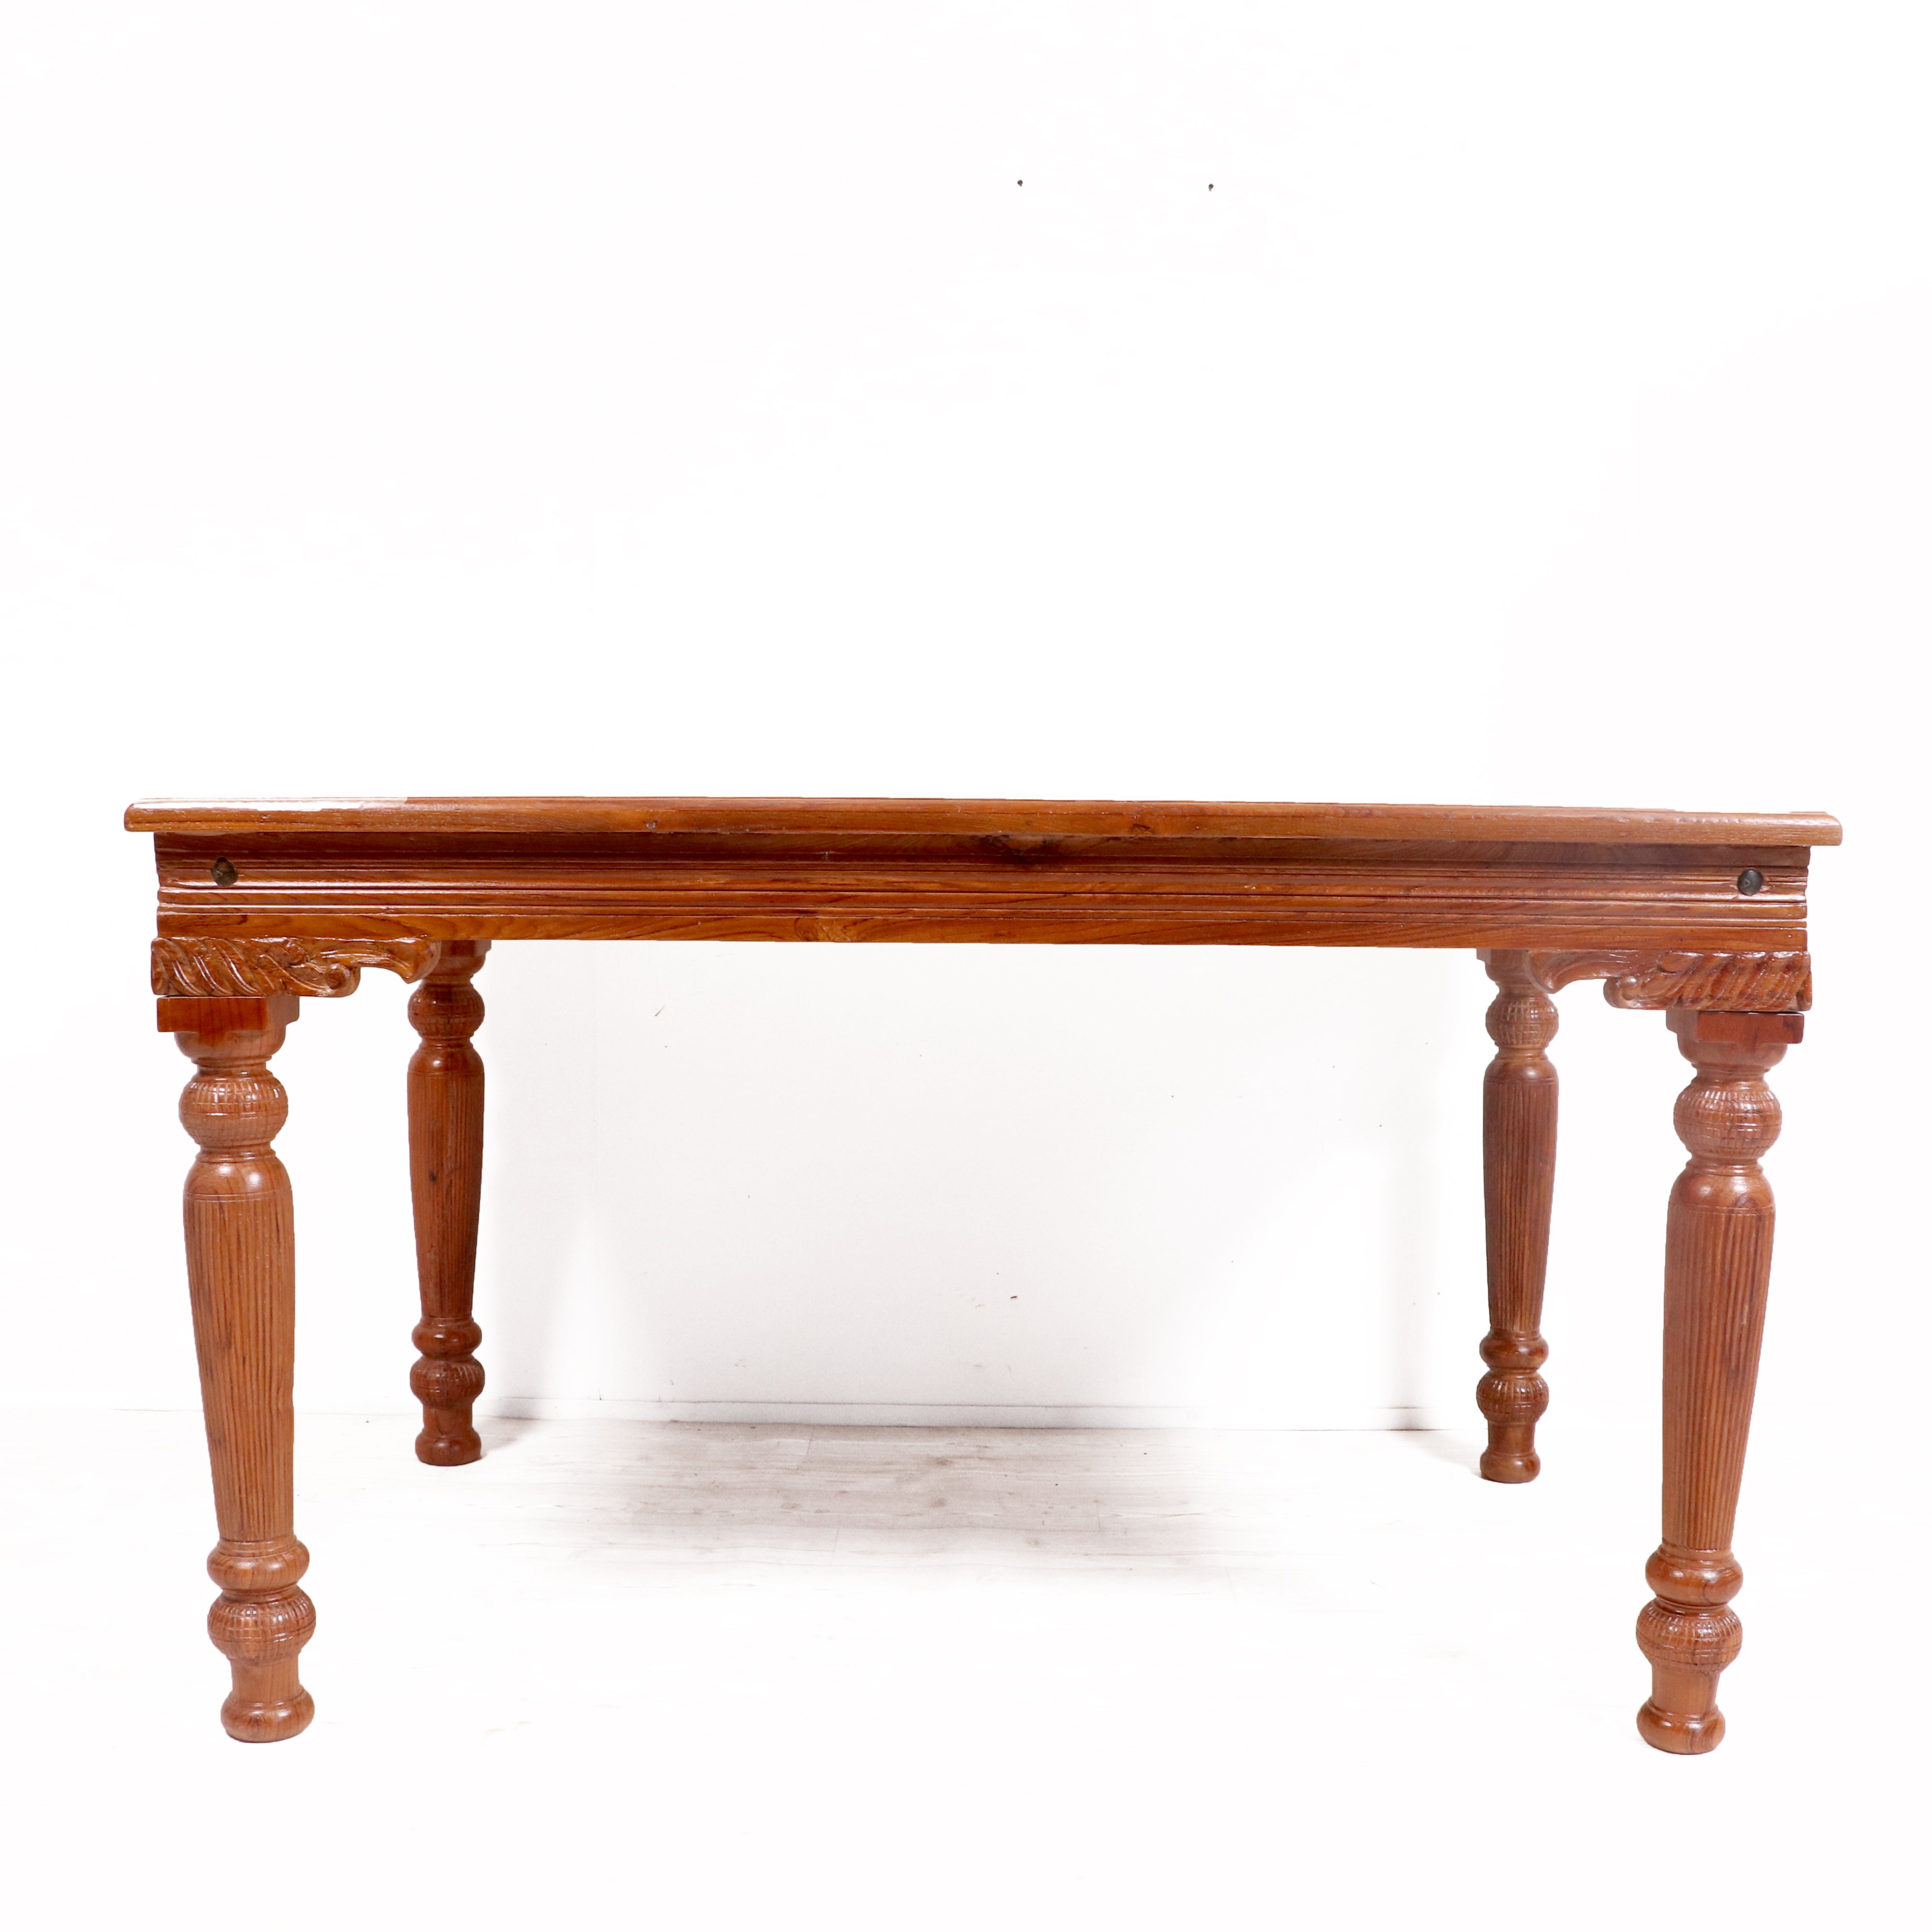 Beautifully carved solid teak wood Dining Table Dining Table